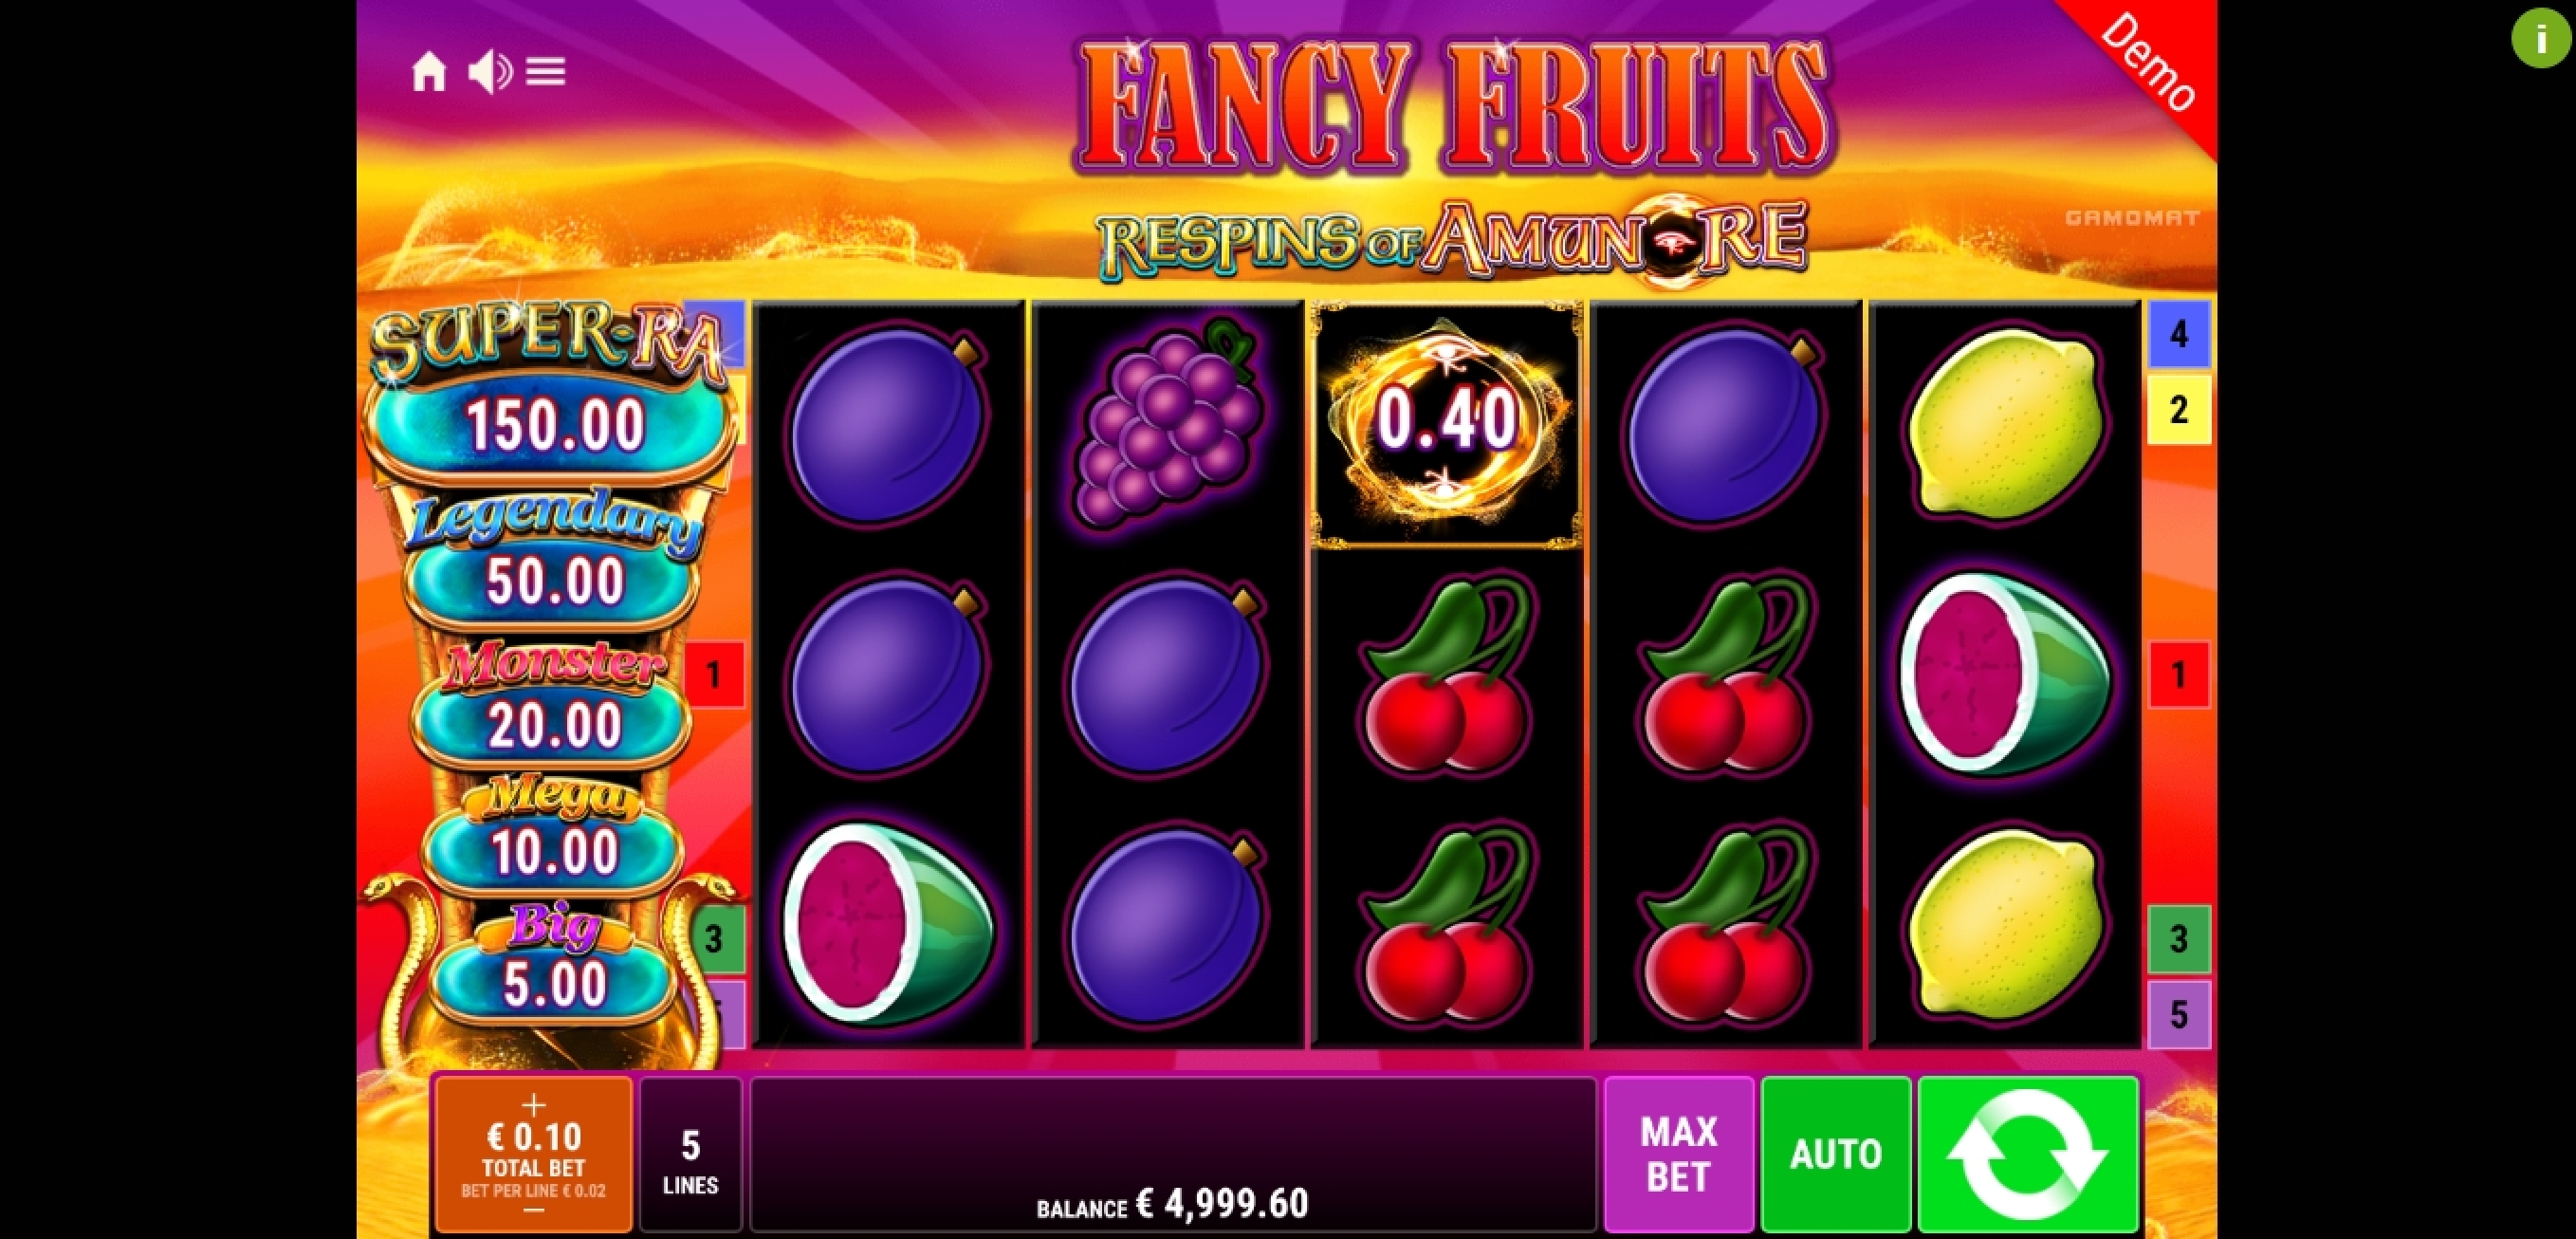 Win Money in Fancy Fruits Respins Of Amun-Re Free Slot Game by Gamomat